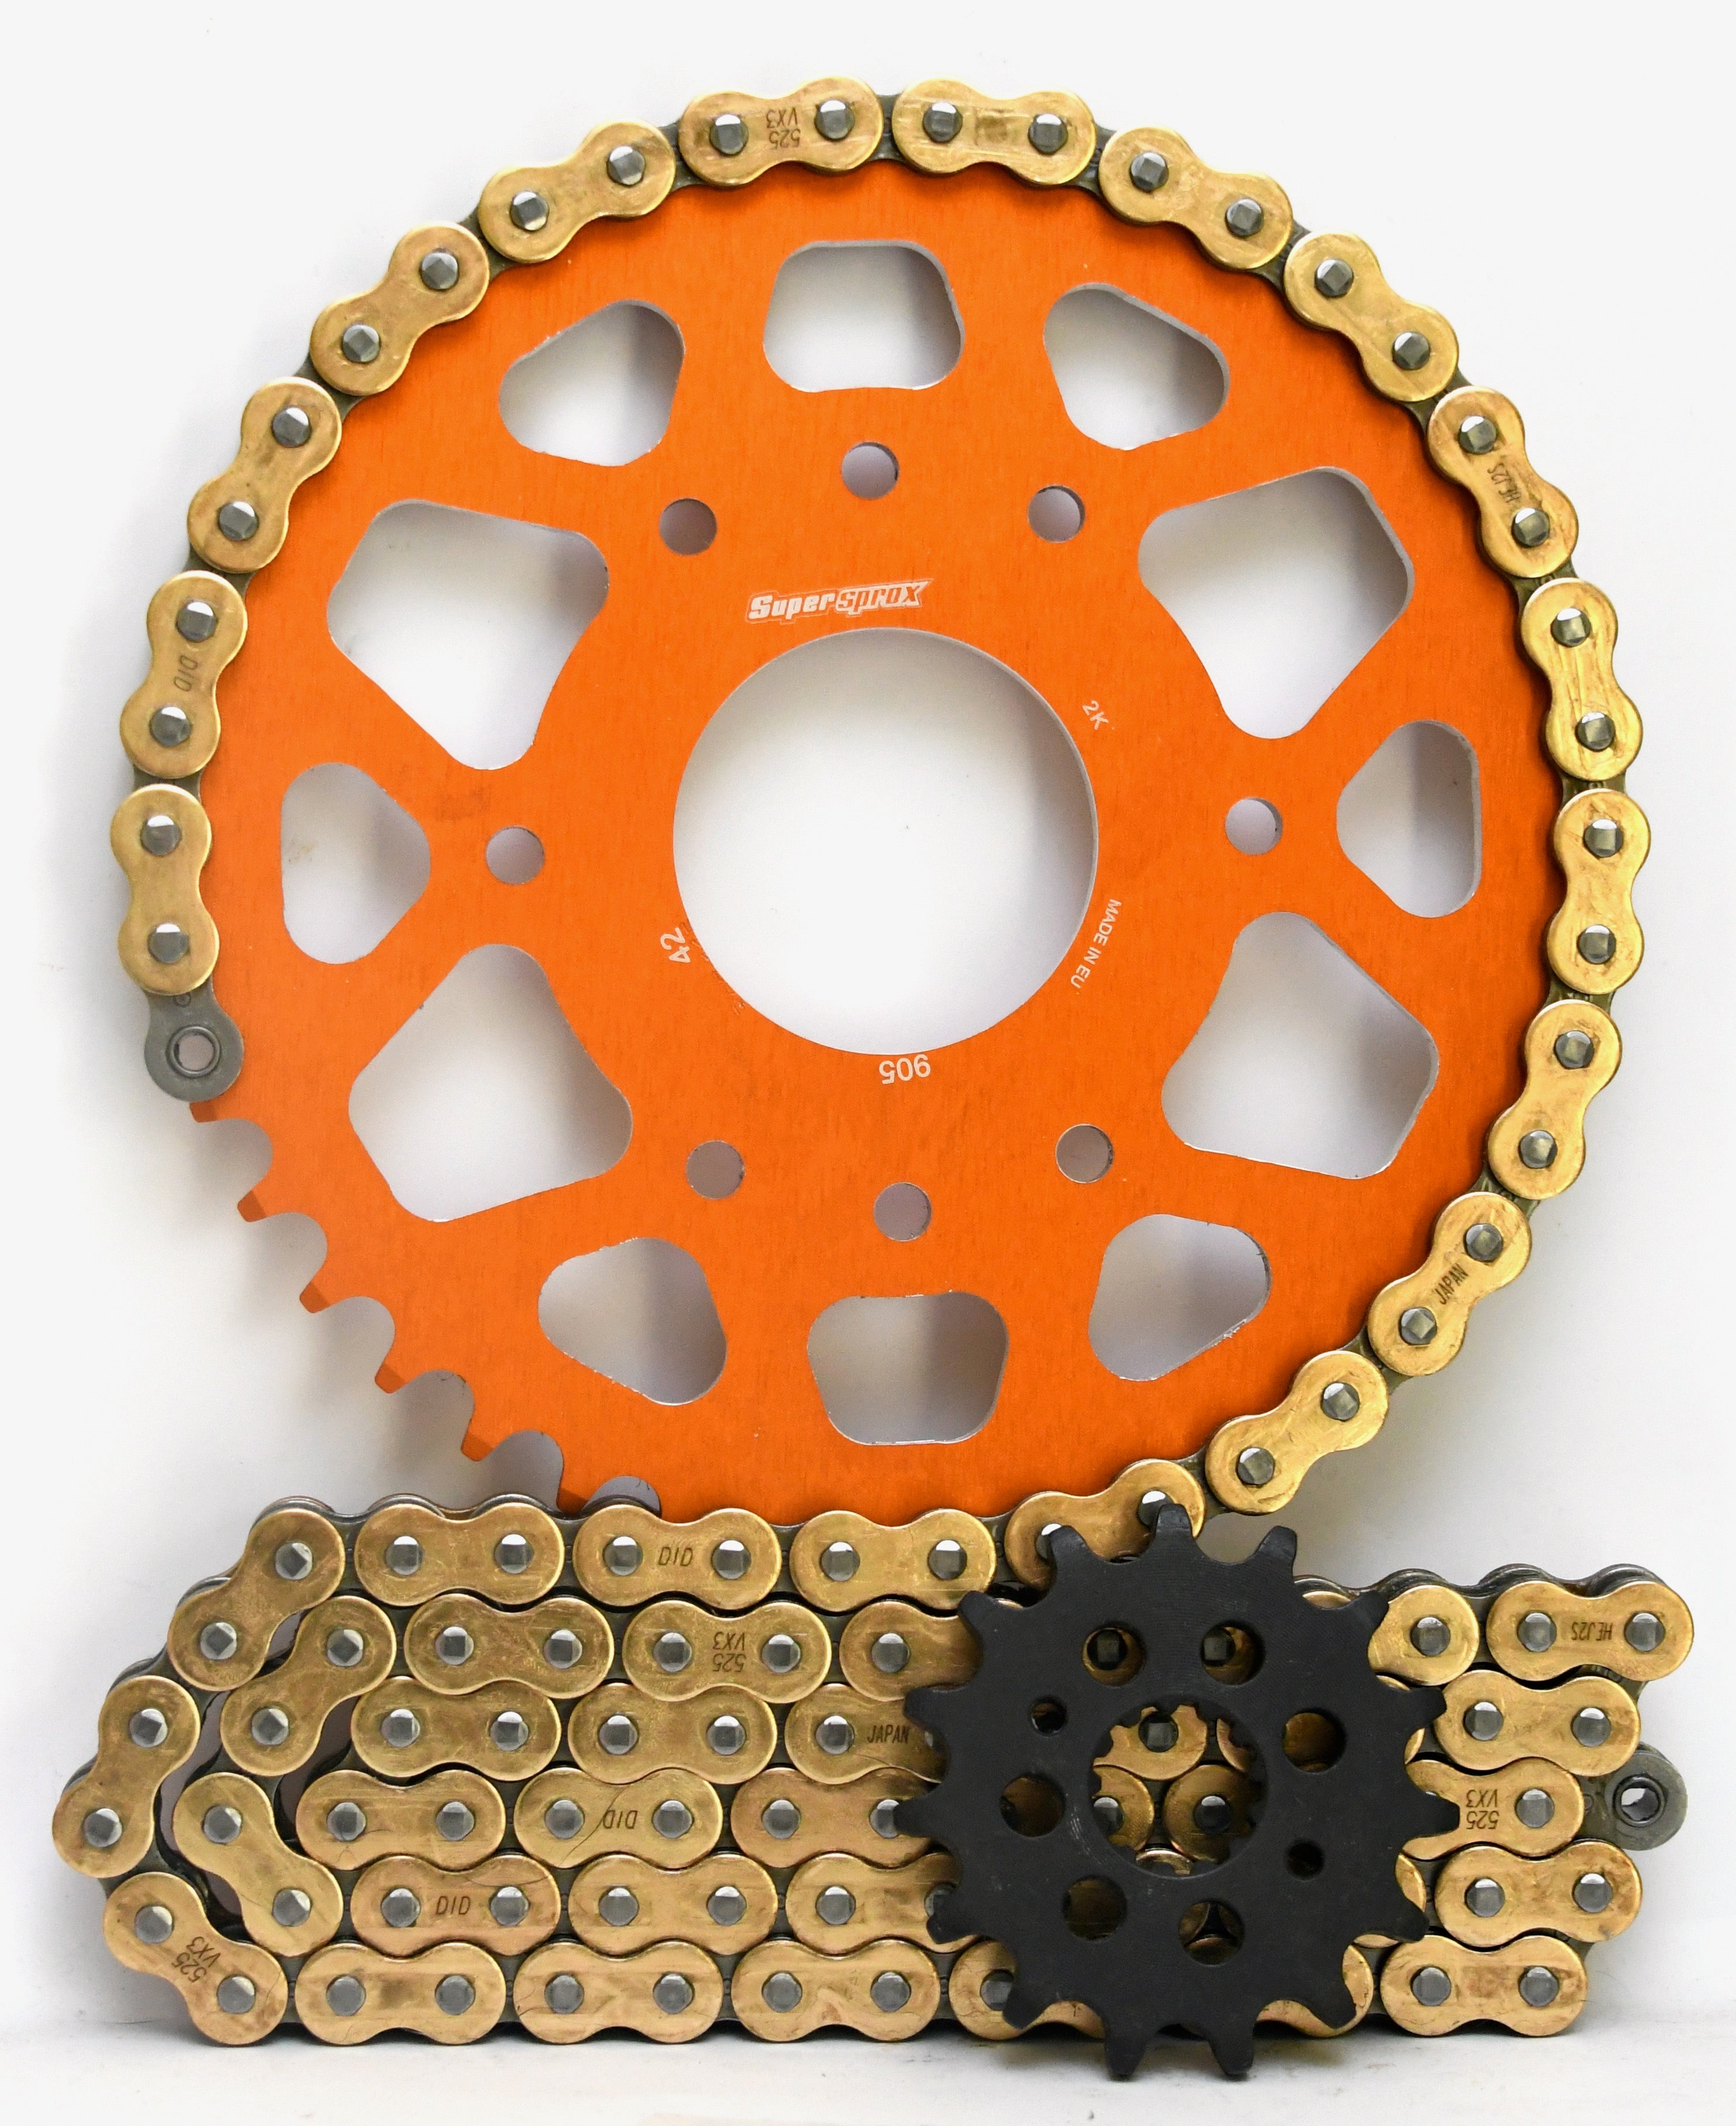 Supersprox Chain & Aluminium Sprocket Kit for KTM 200 RC and Duke - Standard Gearing